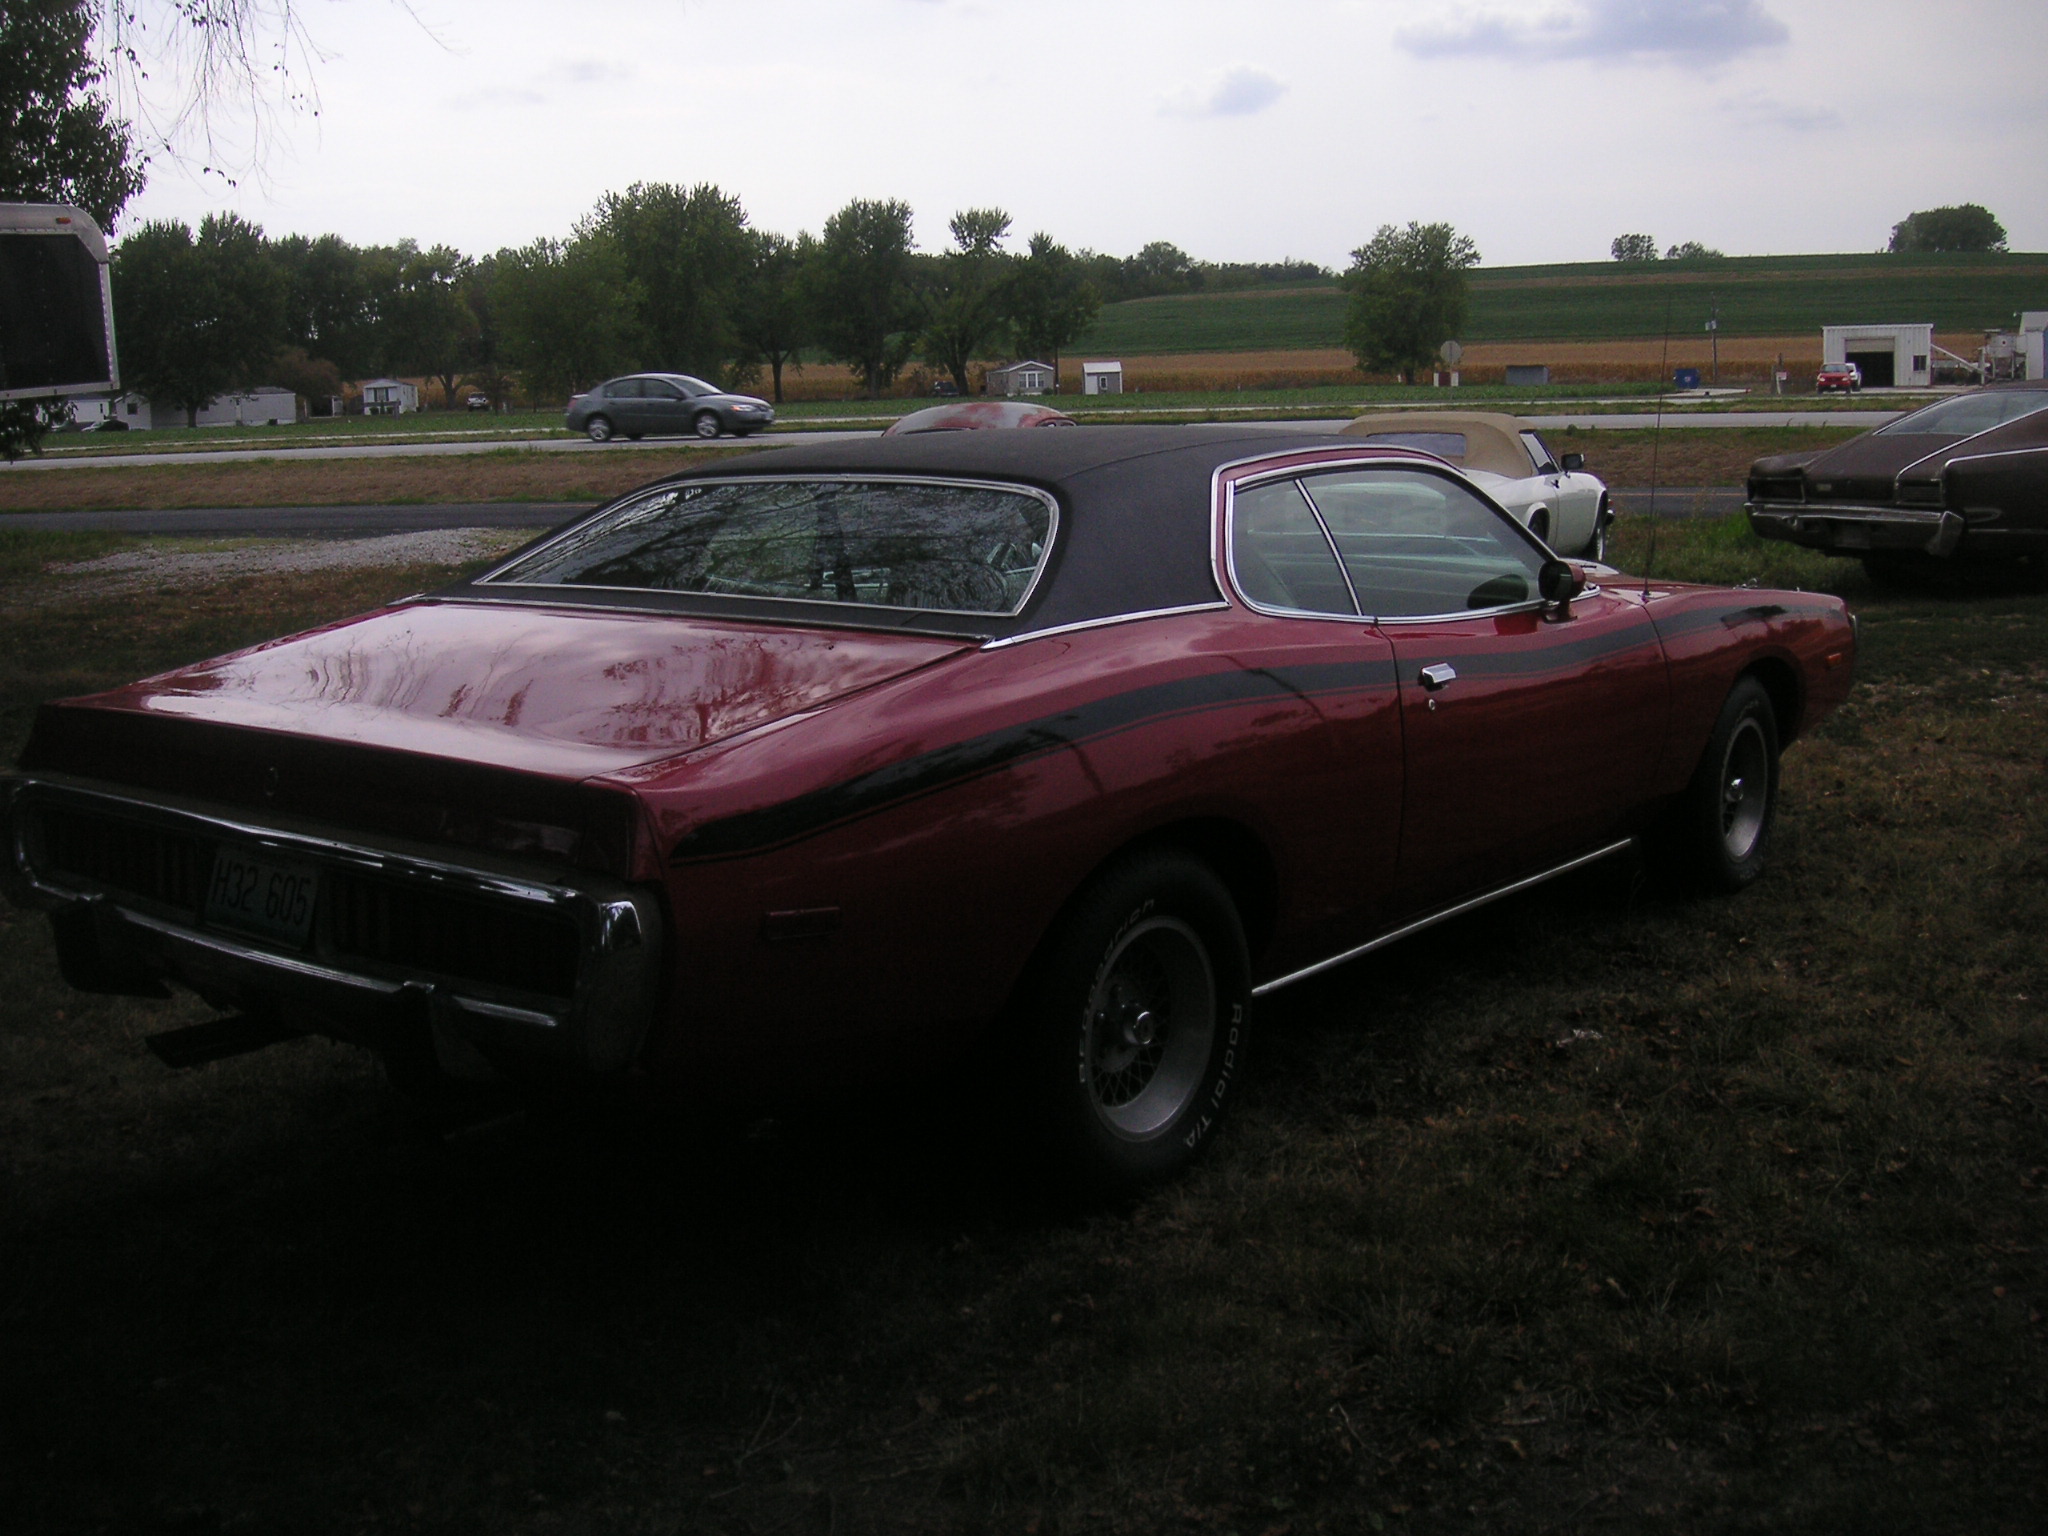 1973 Dodge Charger 440 Magnum-029.jpg. Last edited by larry; August 9th,